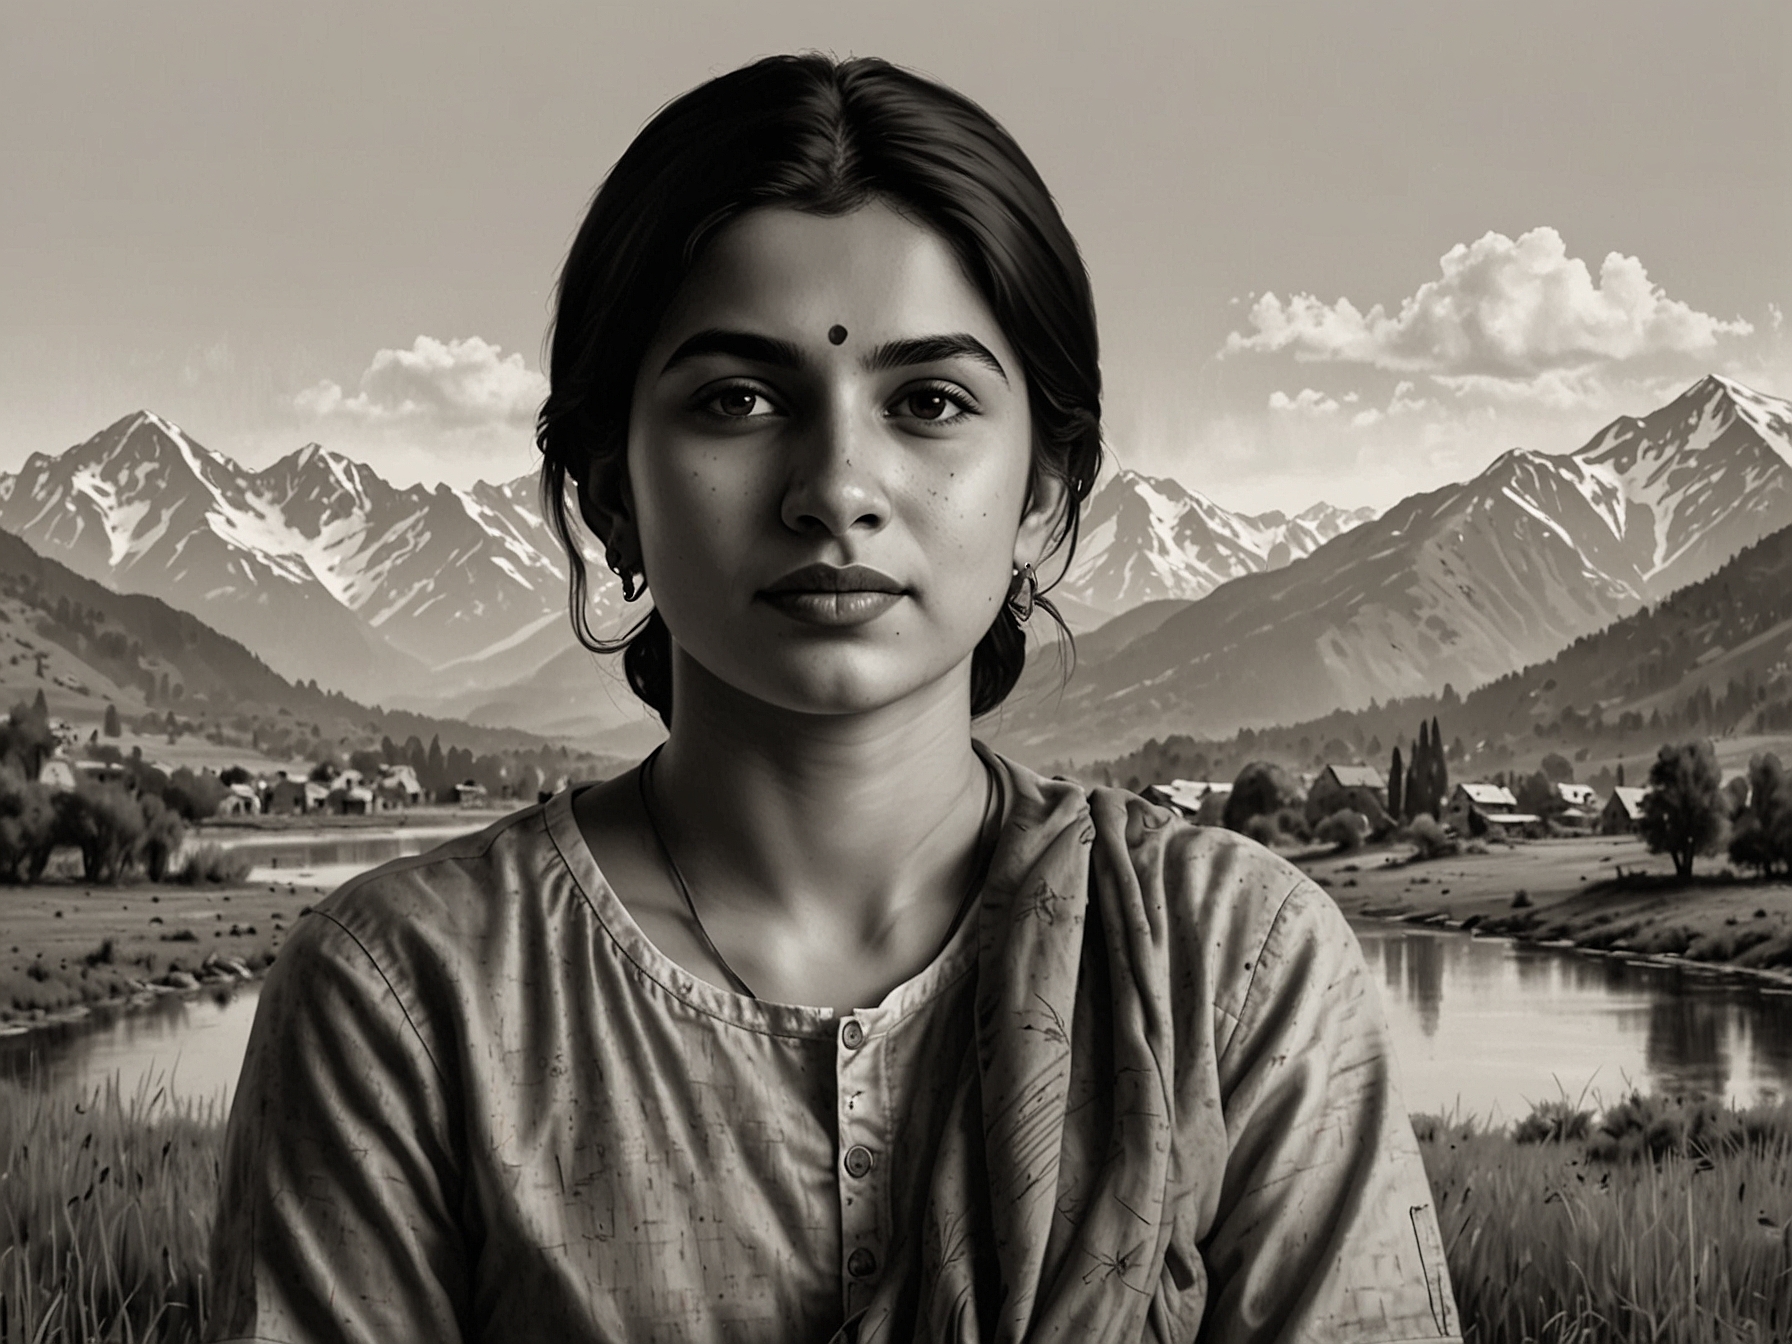 Priyanka Mattoo against the backdrop of Kashmir's serene landscapes, signifying her early life and the deep-seated storytelling inspired by her homeland.